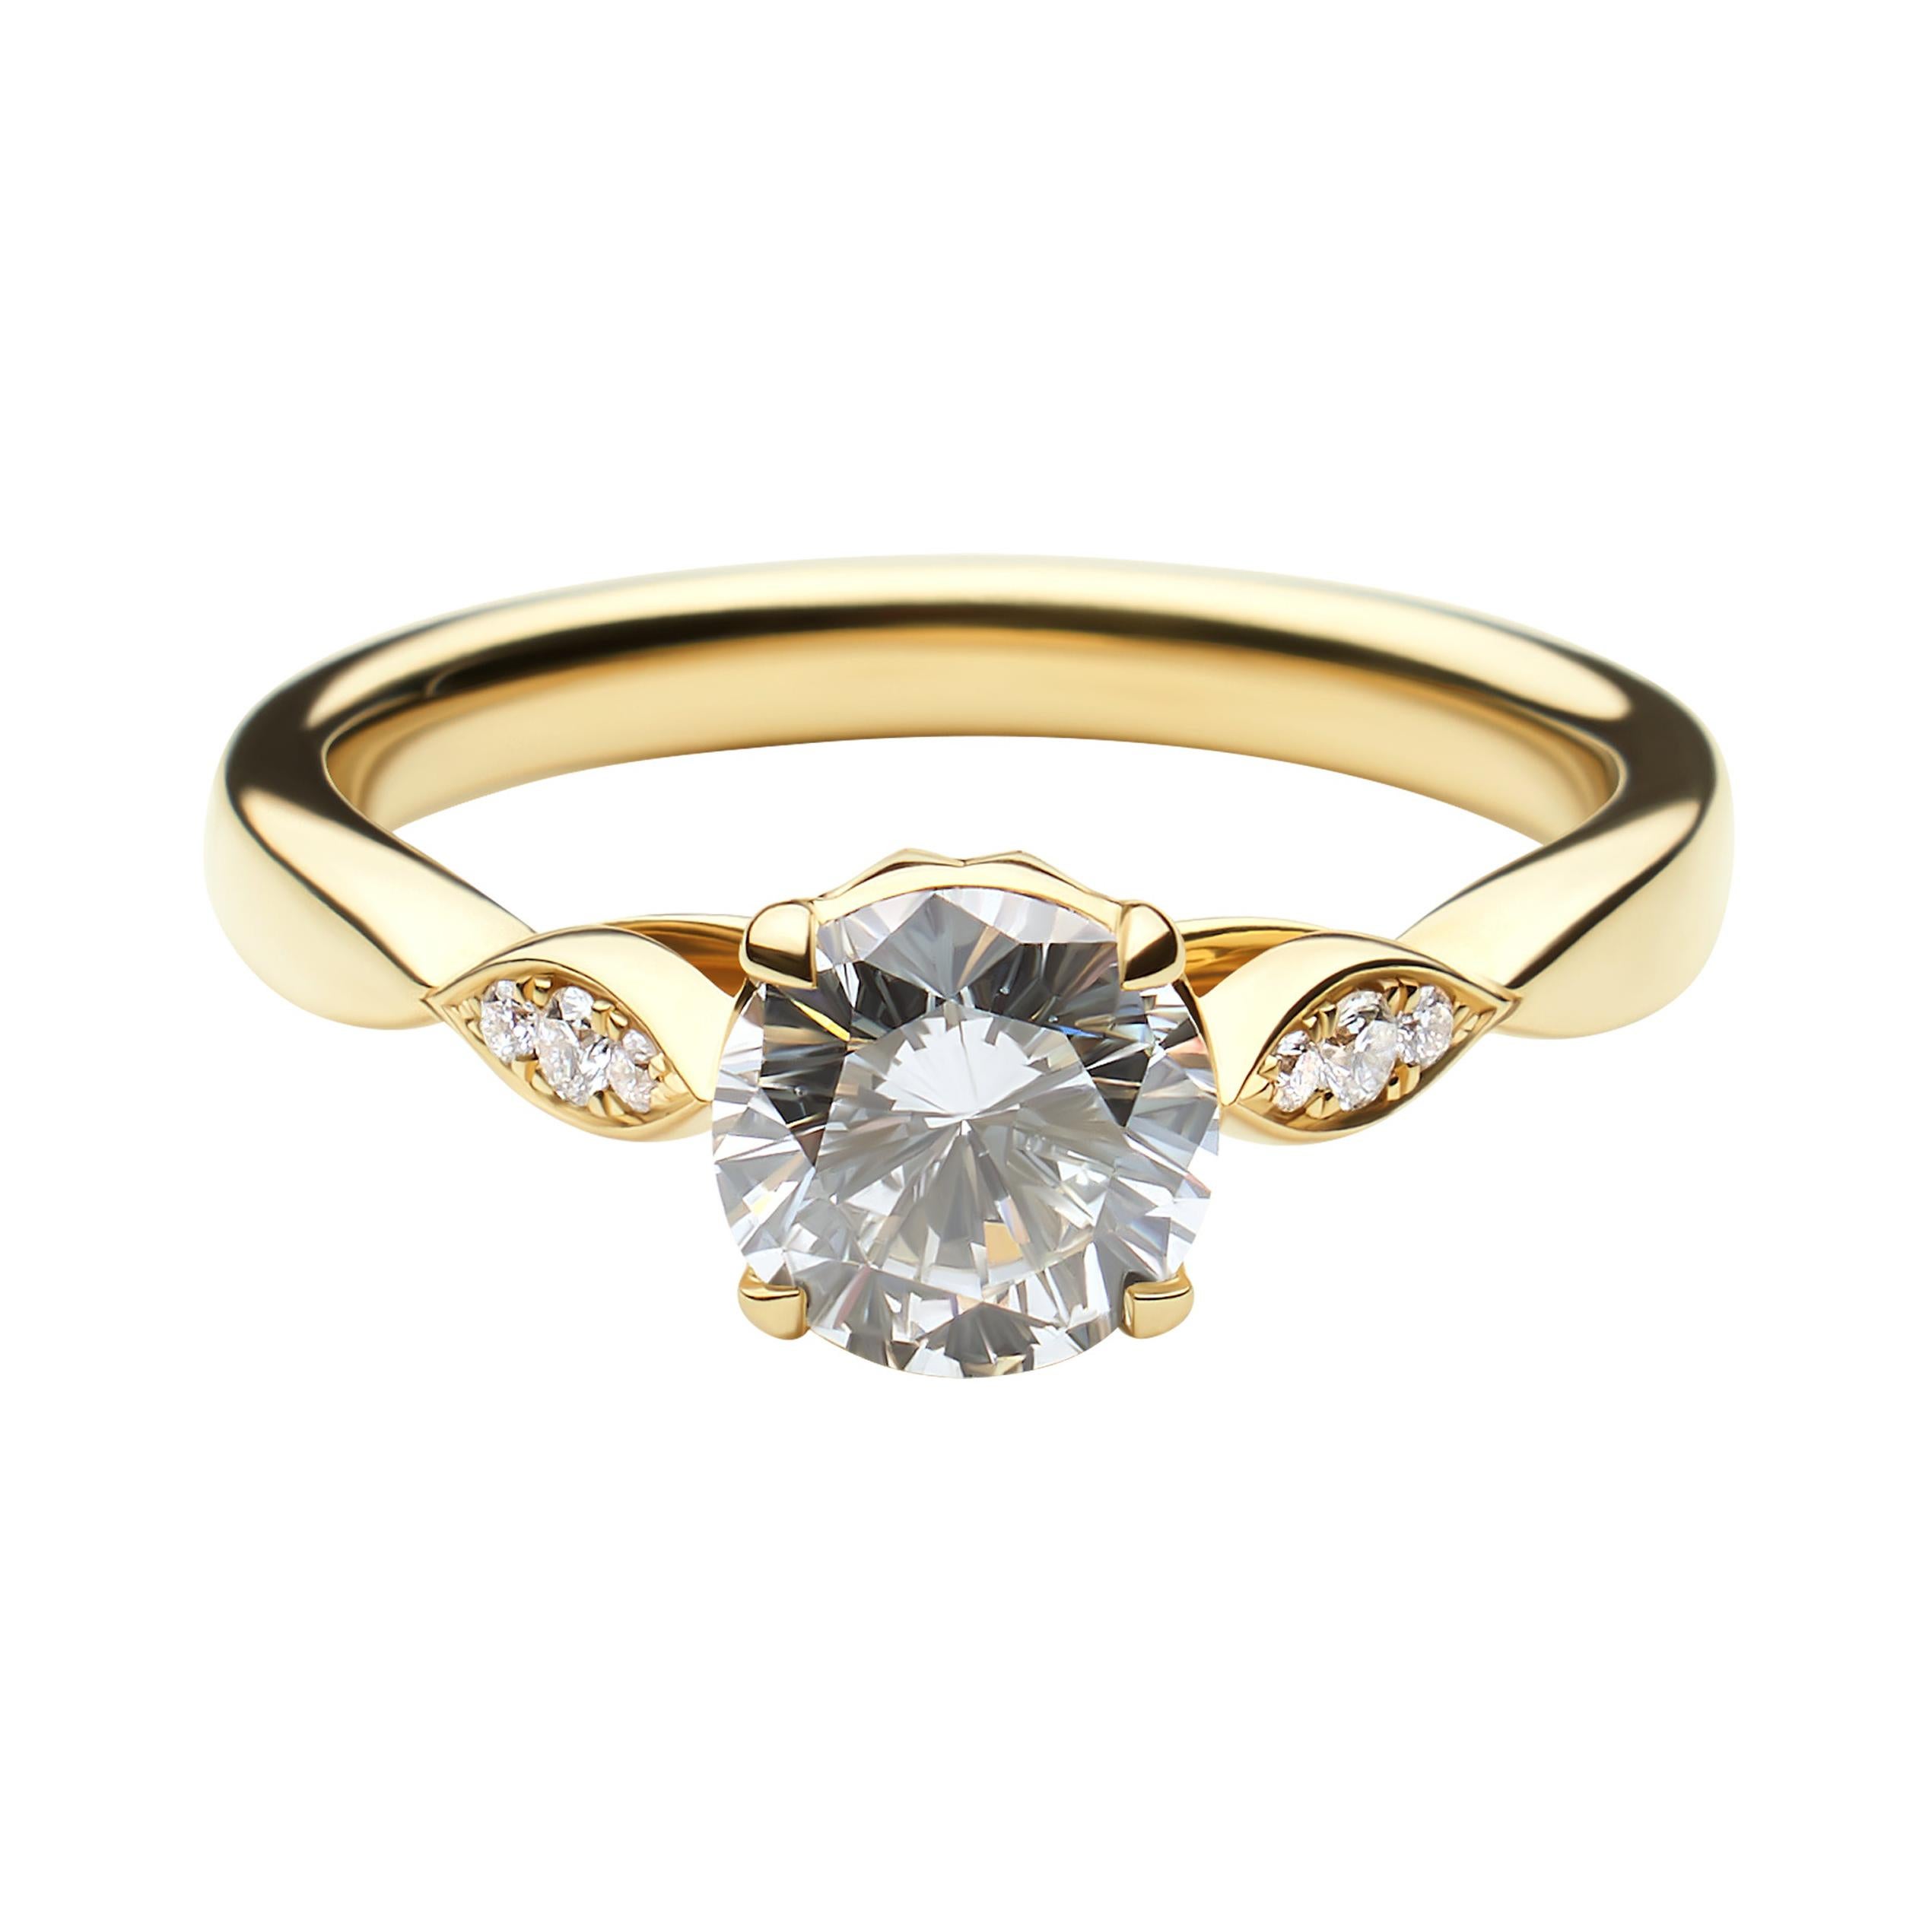 For Sale:  14k Yellow Gold Diamond Engagement Ring with 1.01 Carat Round Cut Diamond